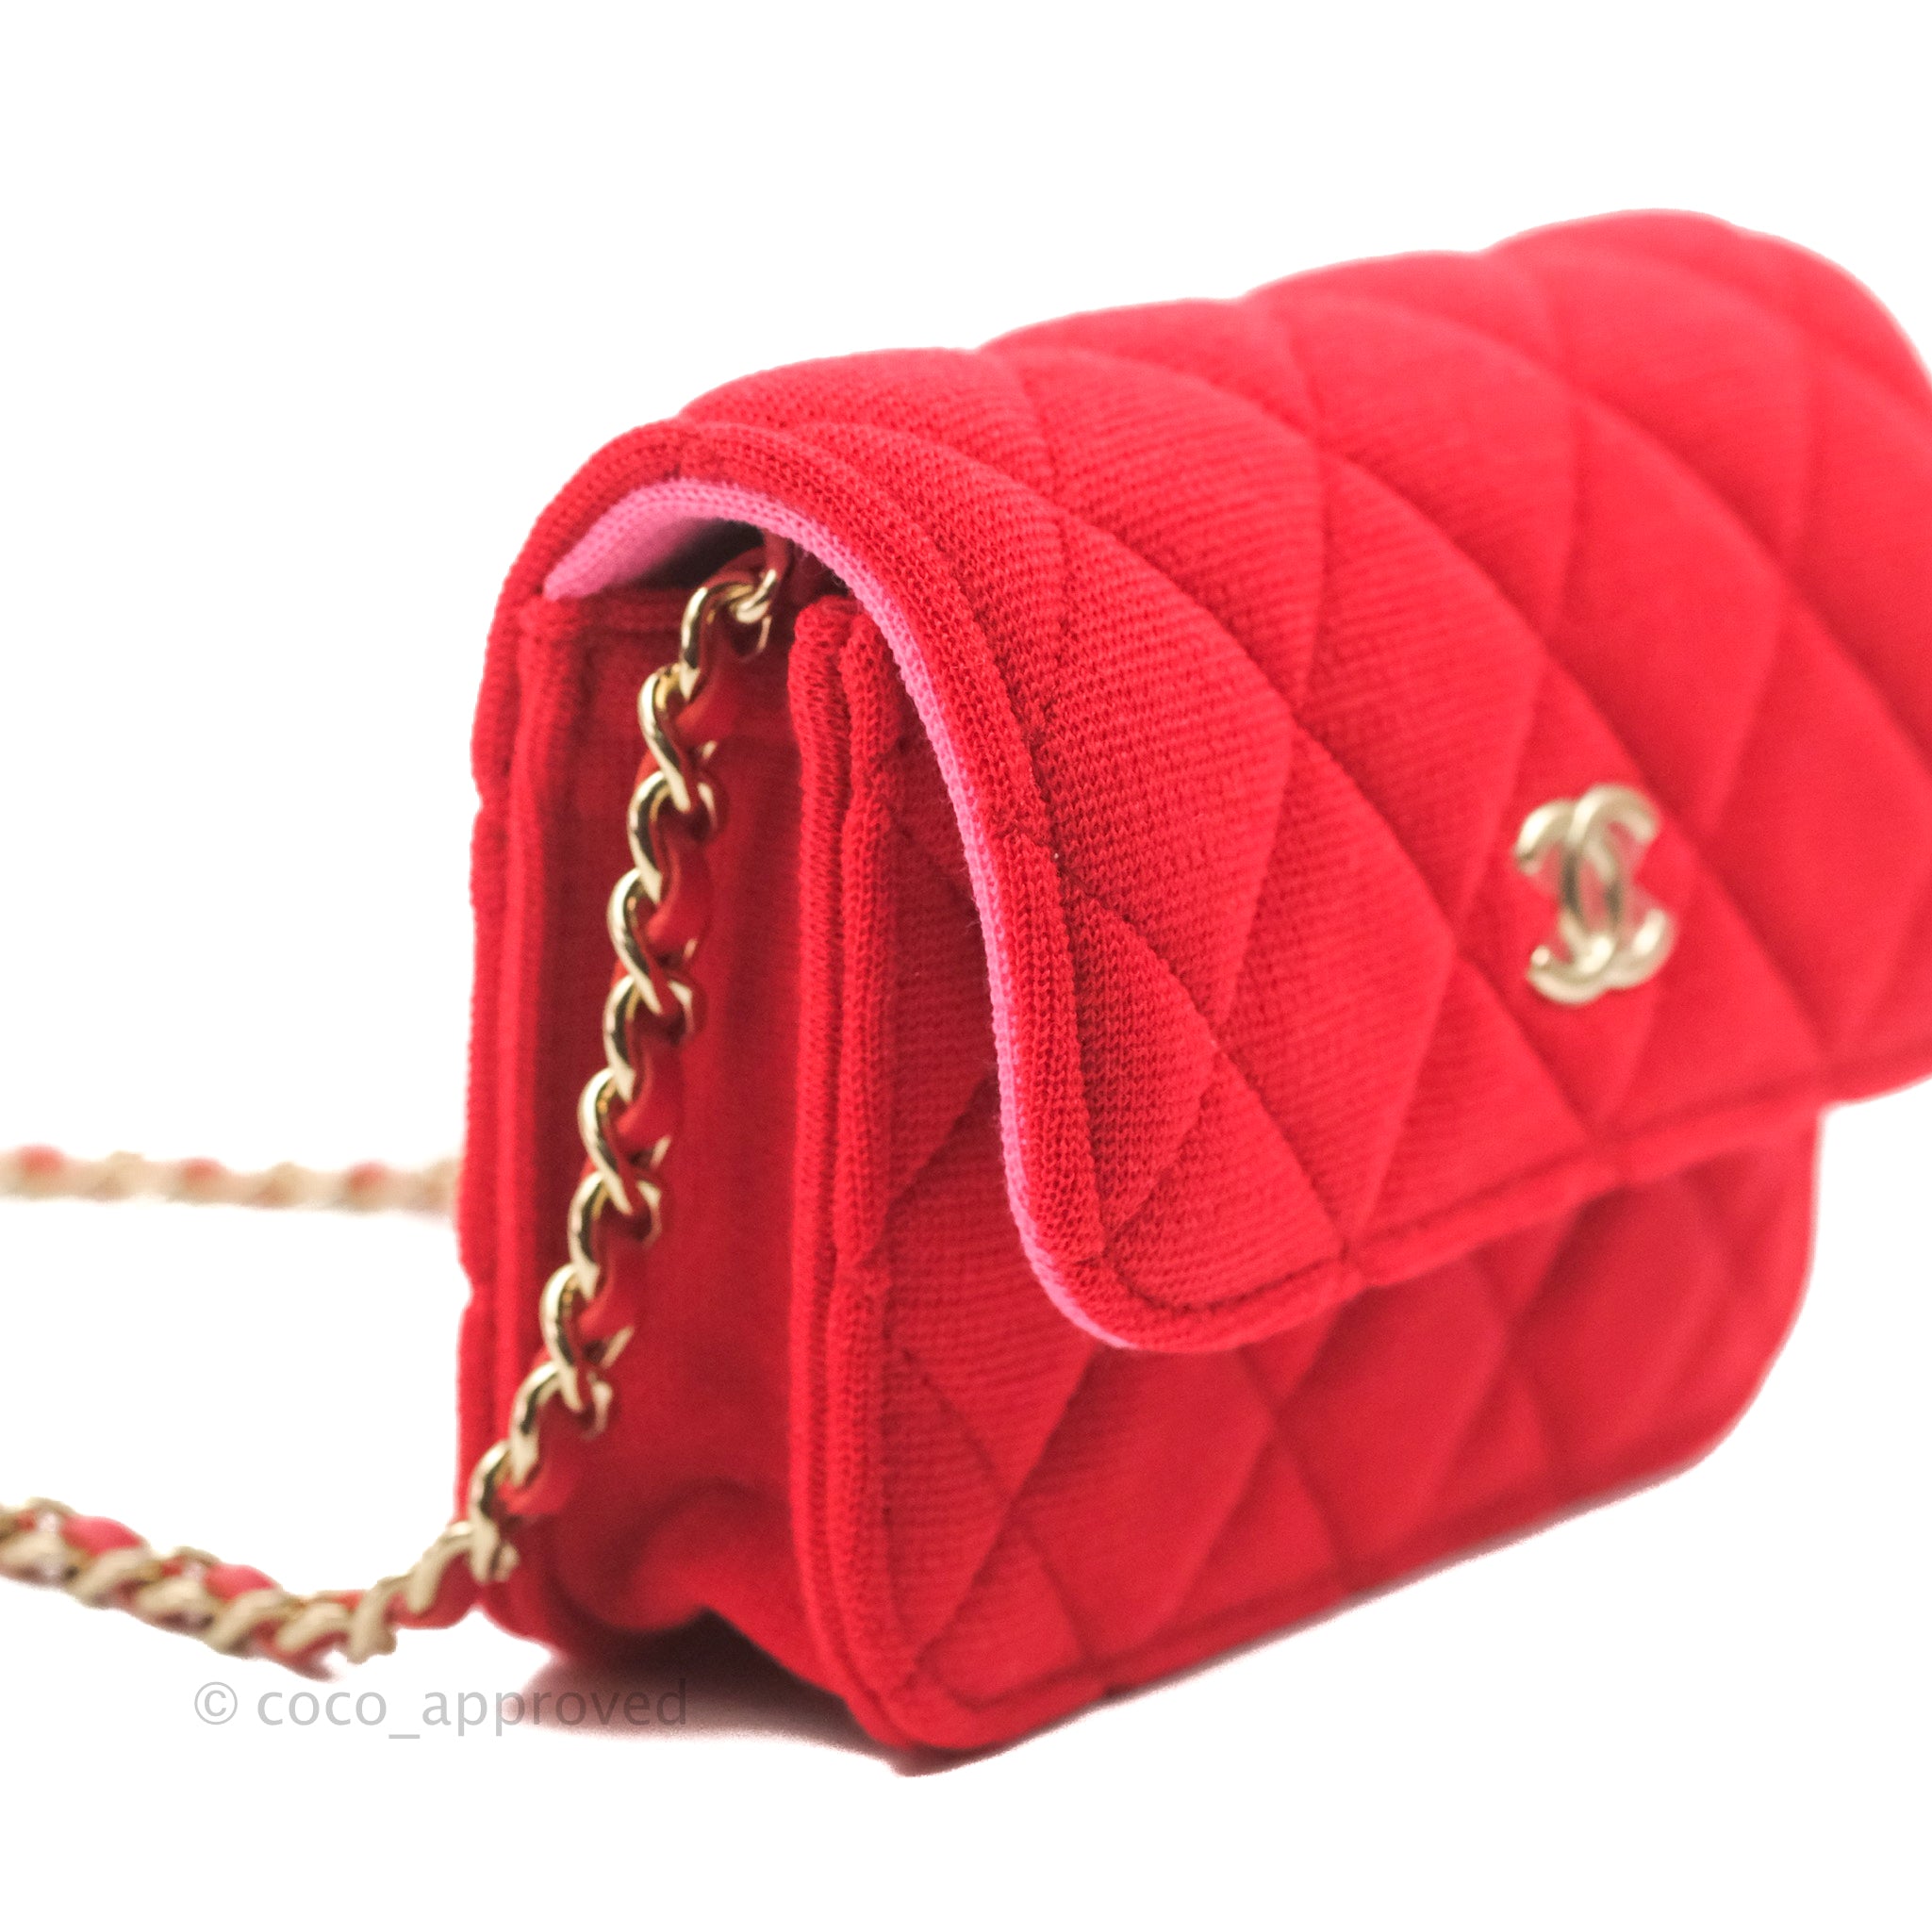 CHANEL, RED LIMITED EDITION CHOCOLATE BAR HEART CLUTCH IN PERSPEX WITH  GOLD TONE WRISTLET CHAIN, 2002/2003, Handbags and Accessories, 2020